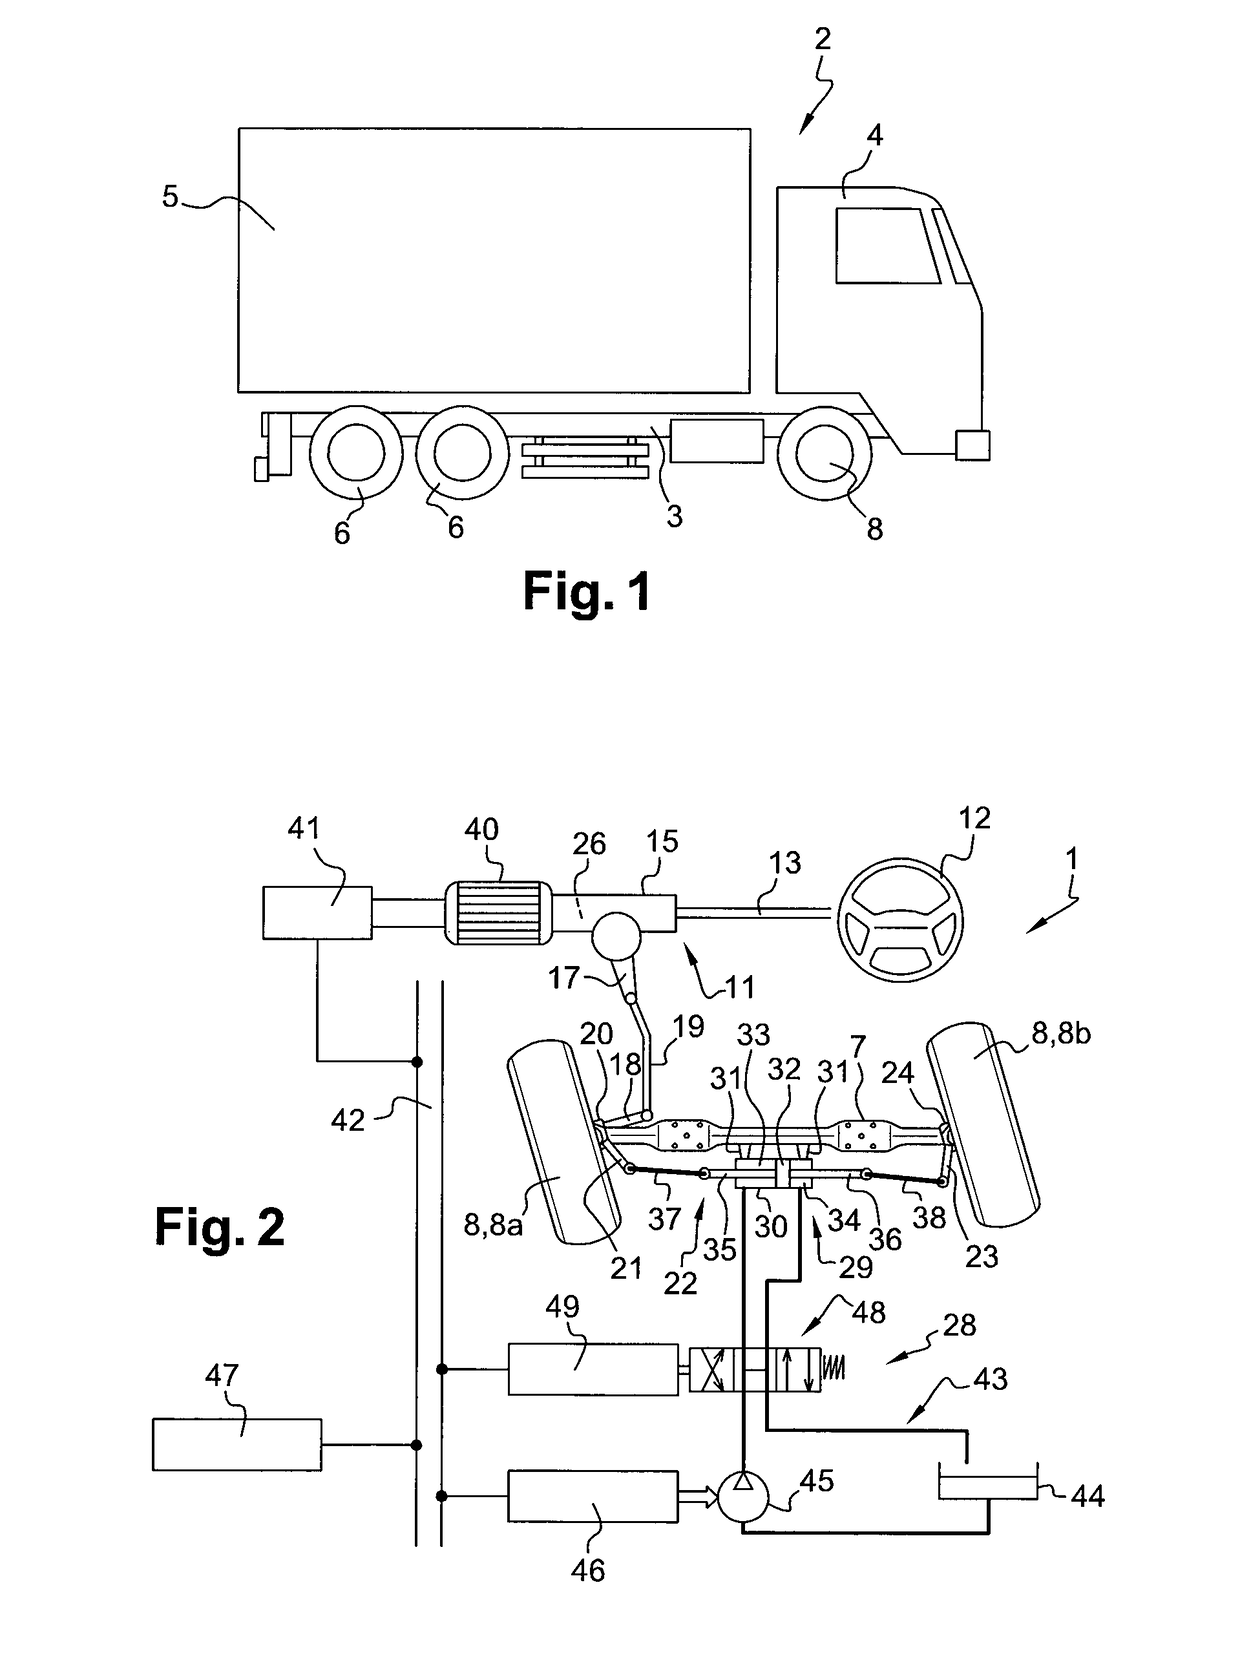 Power steering system for a vehicle